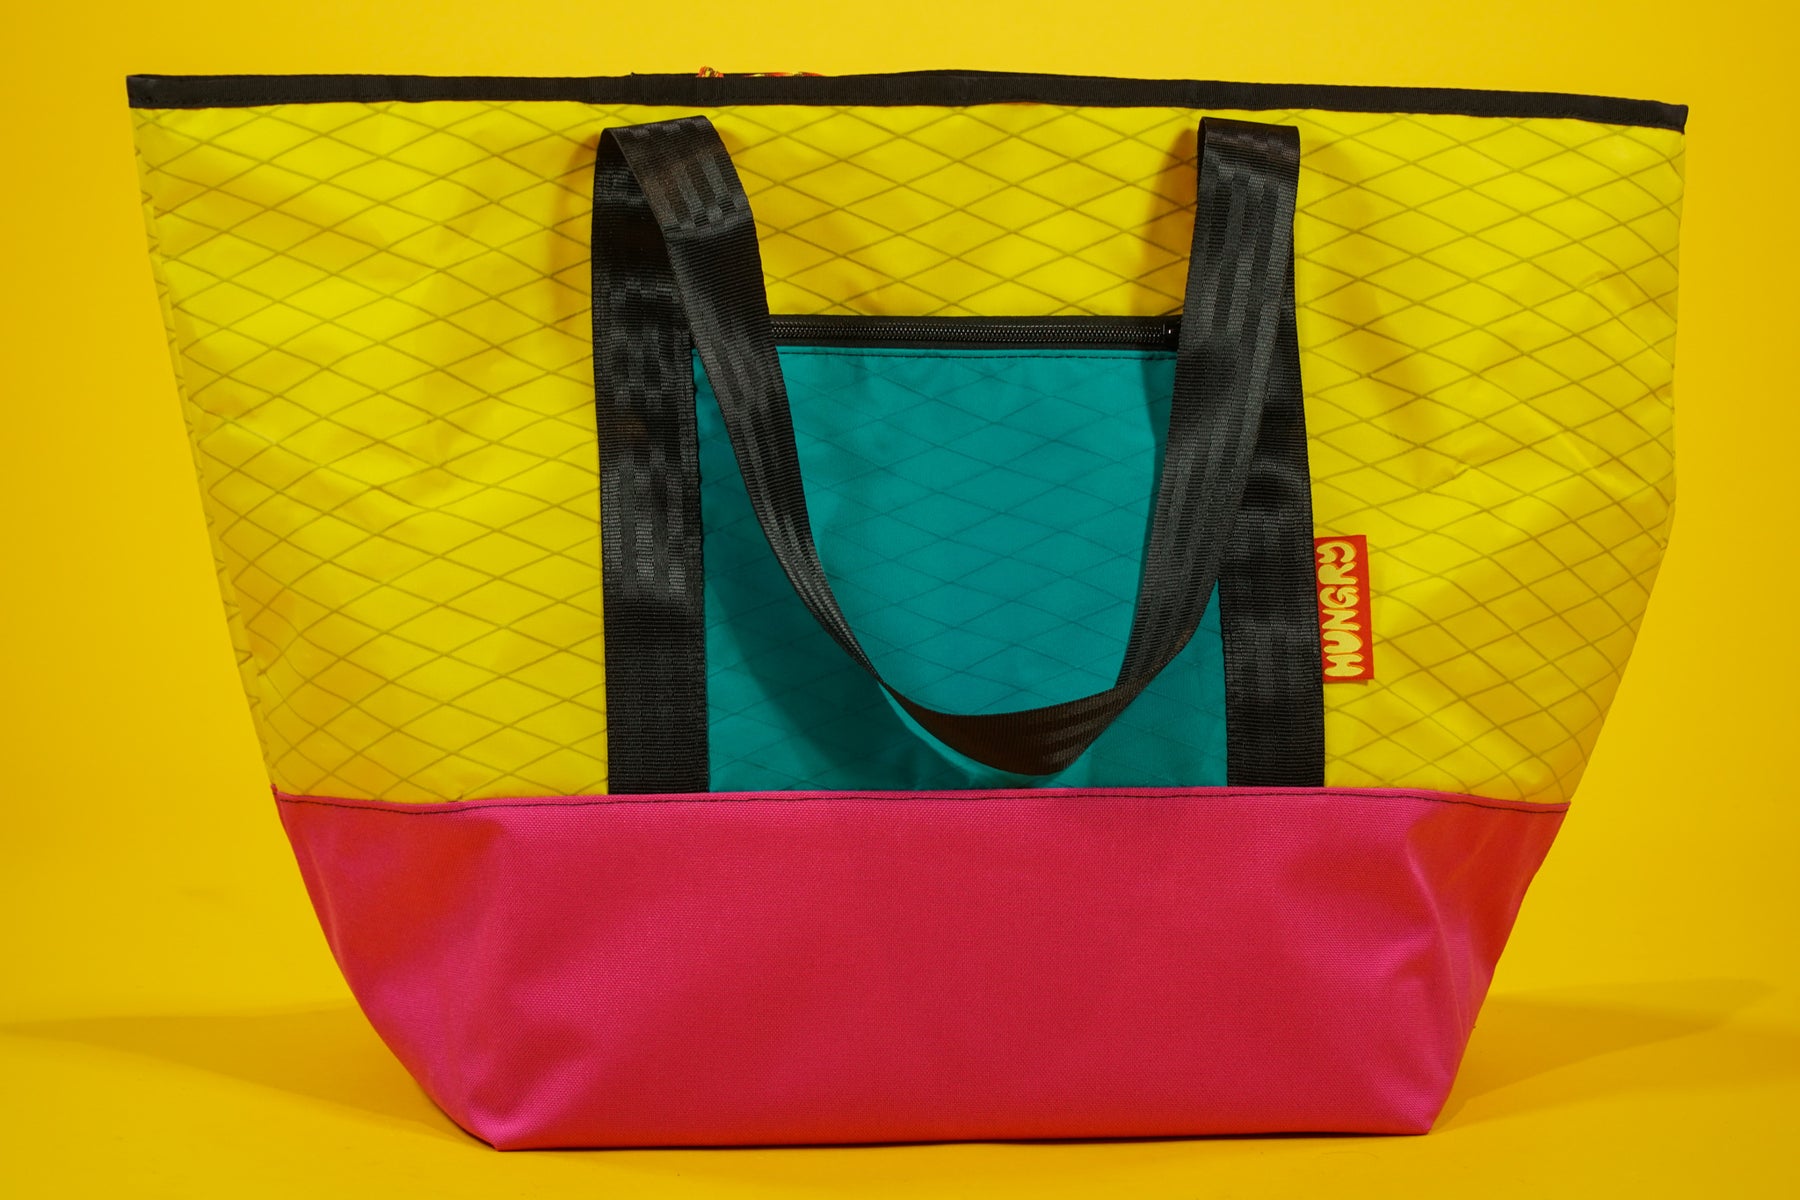 Go Green Tote Bag – Wrap With Jahfya